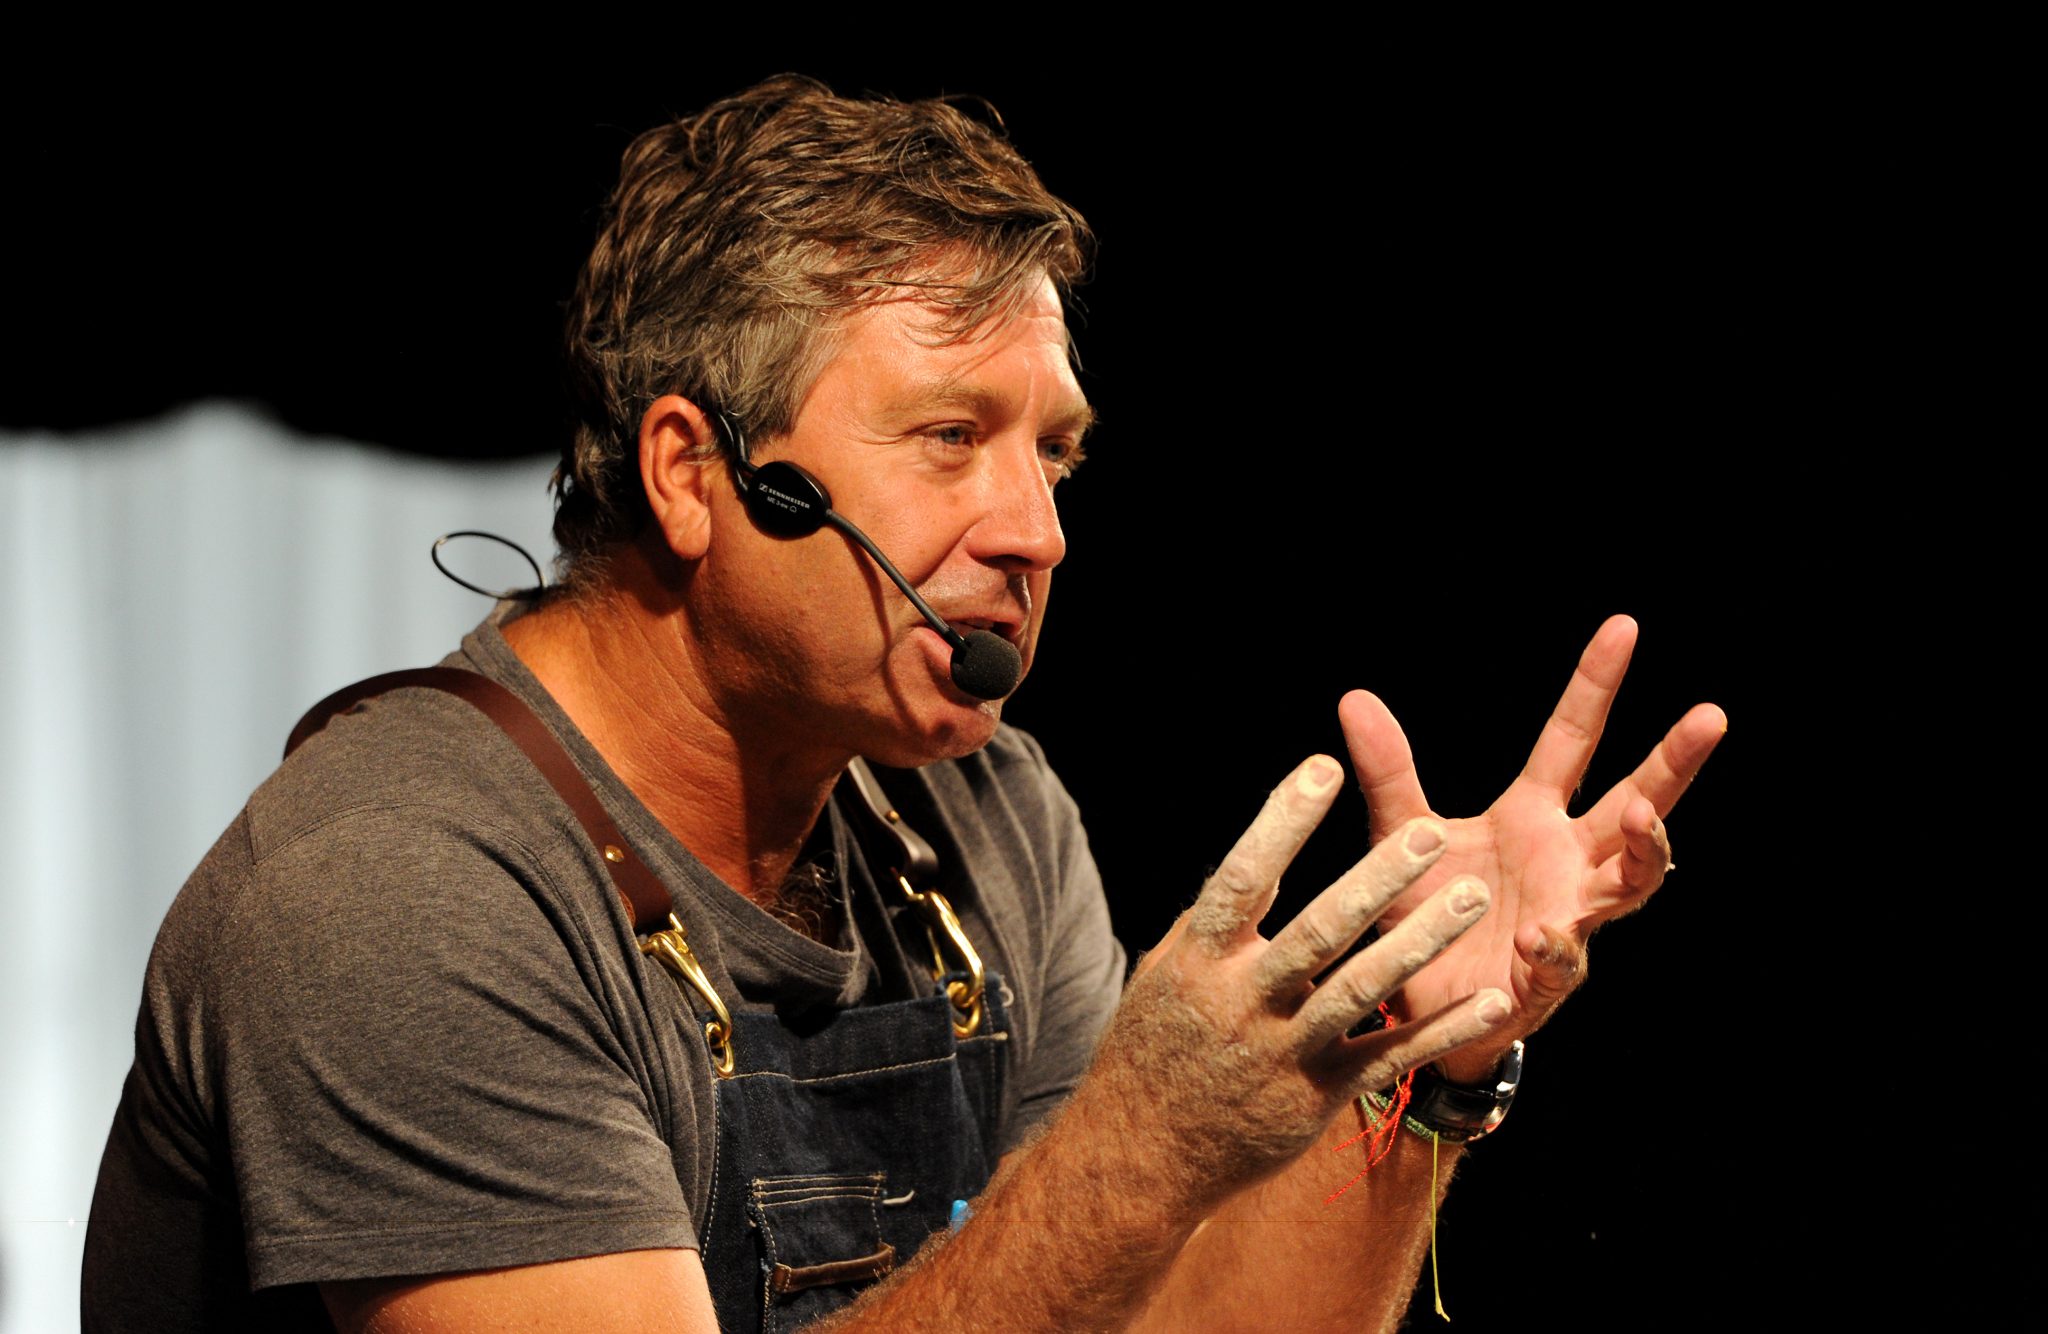 The 10th annual Bolton Food and Drink Festival, Victoria Square, Bolton, Lancashire. Masterchef's John Torode during his cookery demonstration. Picture by Paul Heyes, Sunday August 30, 2015.